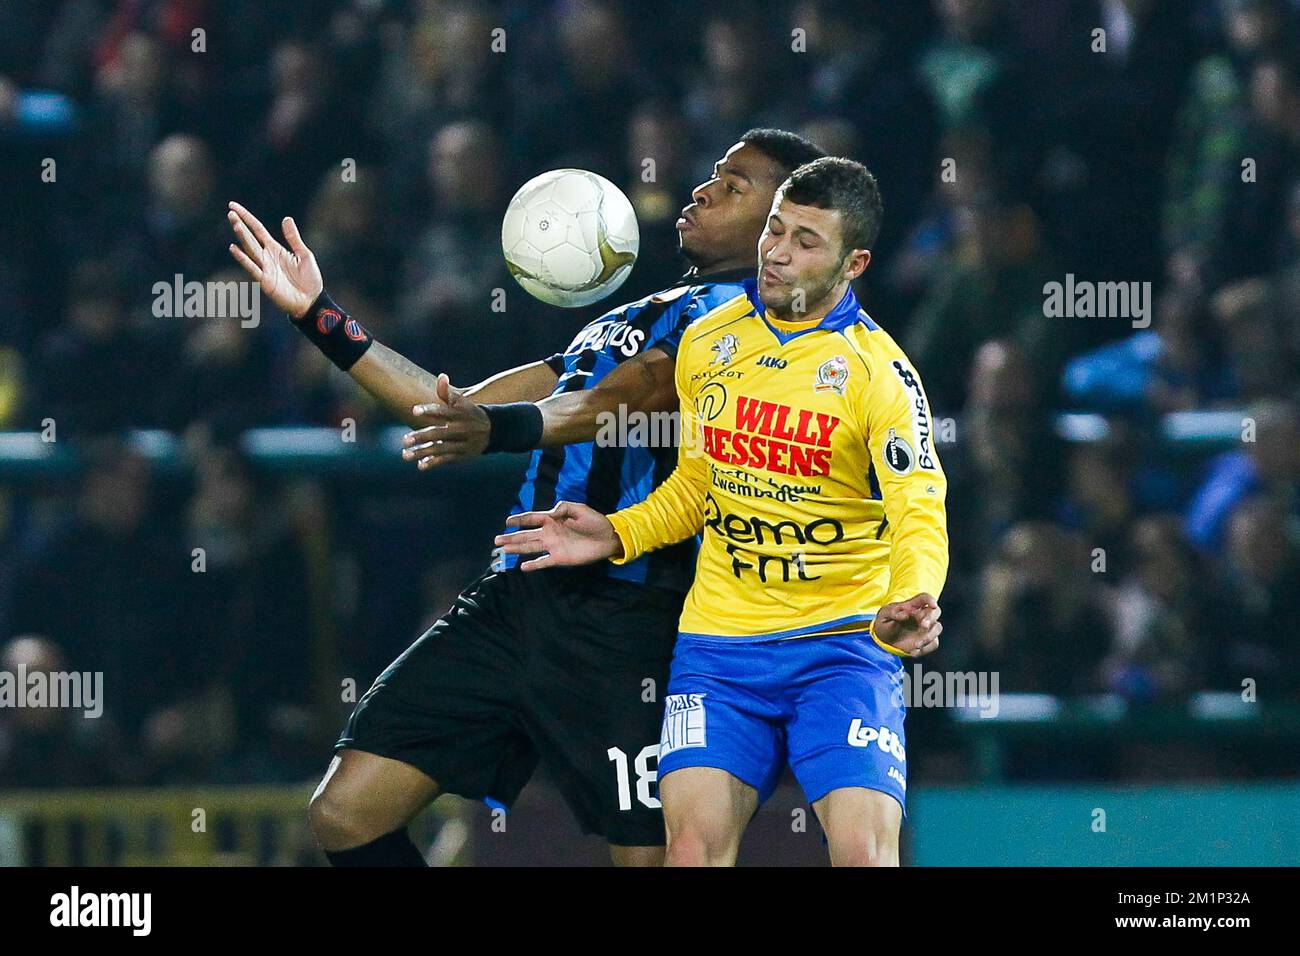 20121117 - BEVEREN, BELGIUM: Club's Ryan Donk and Waasland-Beveren's Mohammad Ghadir fight for the ball during the Jupiler Pro League match between Waasland-Beveren and Club Brugge KV, in Beveren, Saturday 17 November 2012, on day 16 of the Belgian soccer championship. BELGA PHOTO BRUNO FAHY Stock Photo